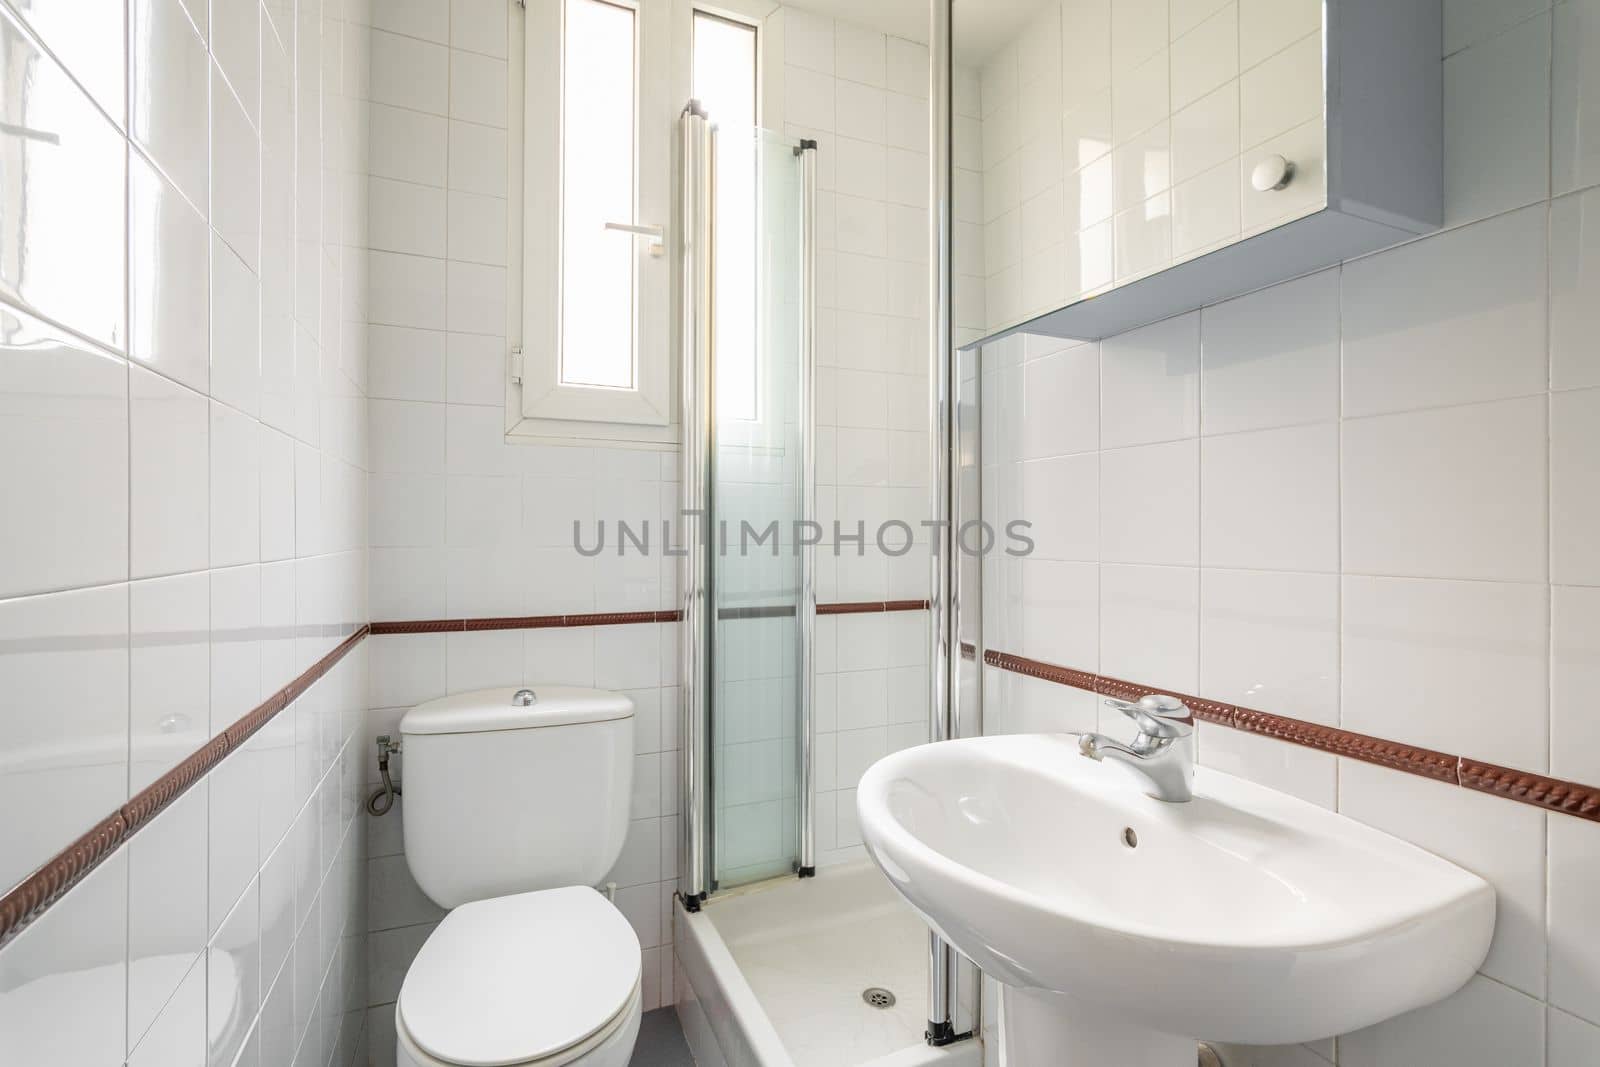 Luxury bathroom is lined with white ceramic tiles with shower toilet and sink with a narrow vertical windows for natural light. Concept of compact but comfortable bathrooms.